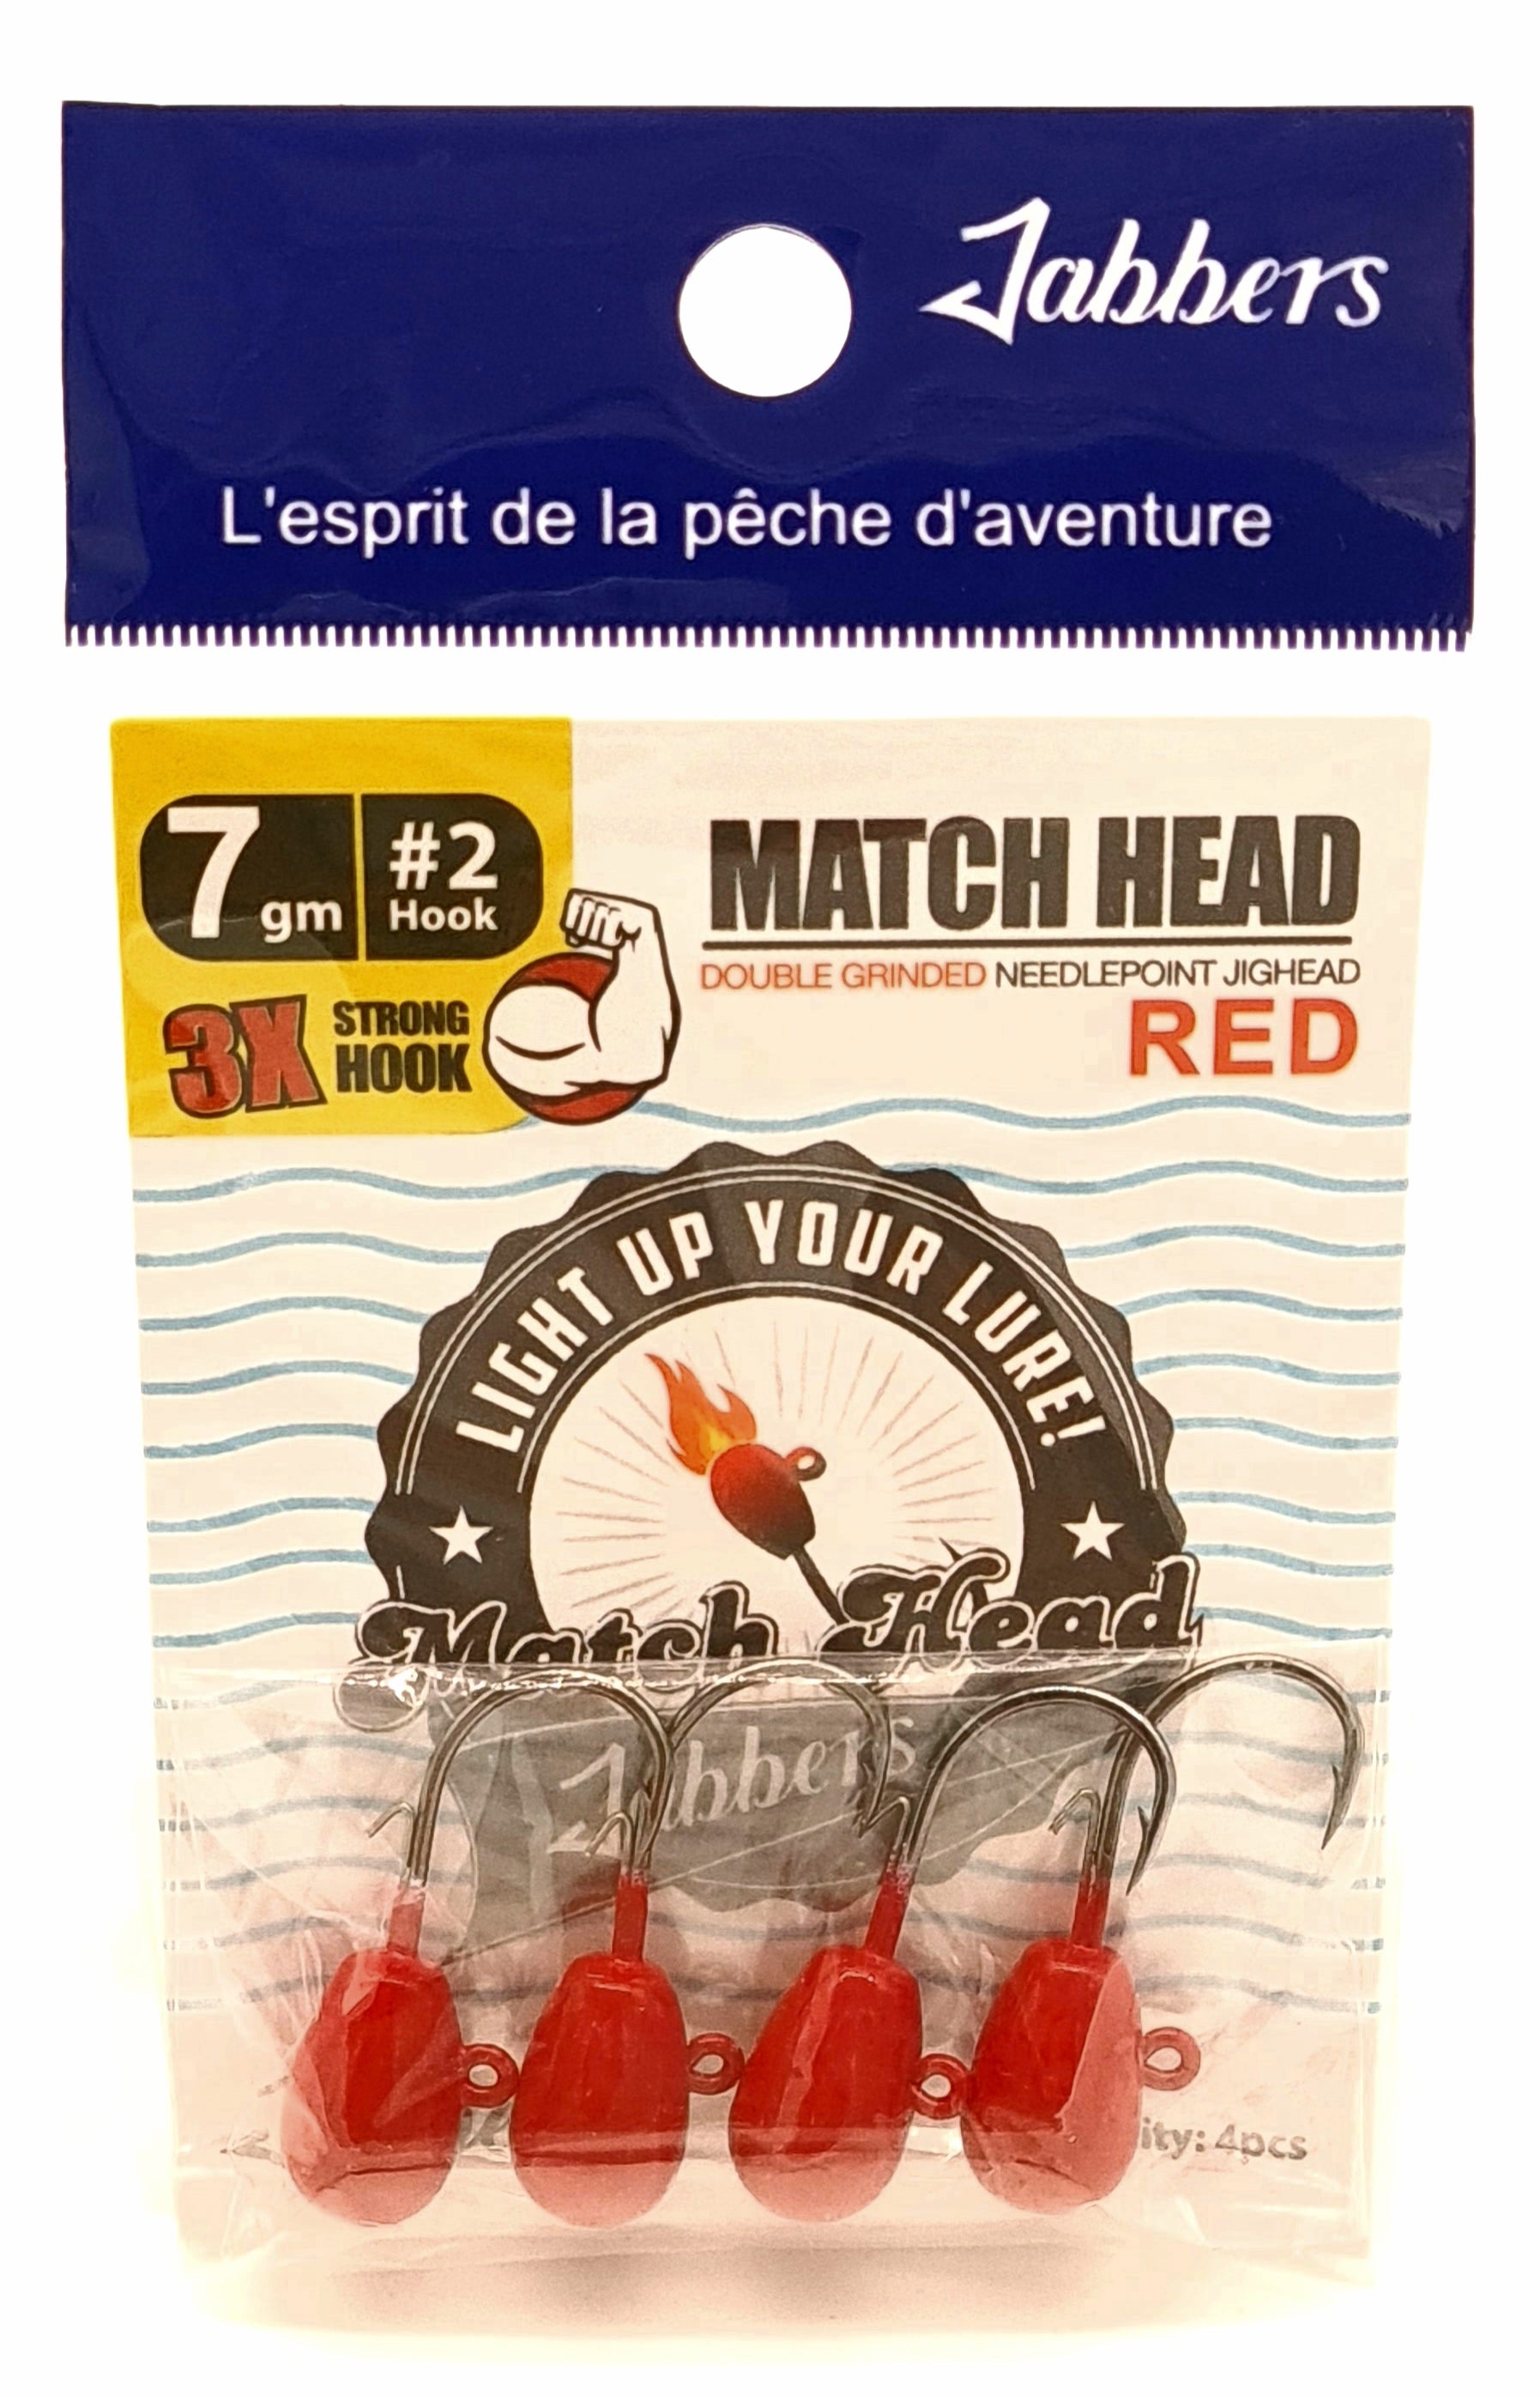 Jabbers Match Head red